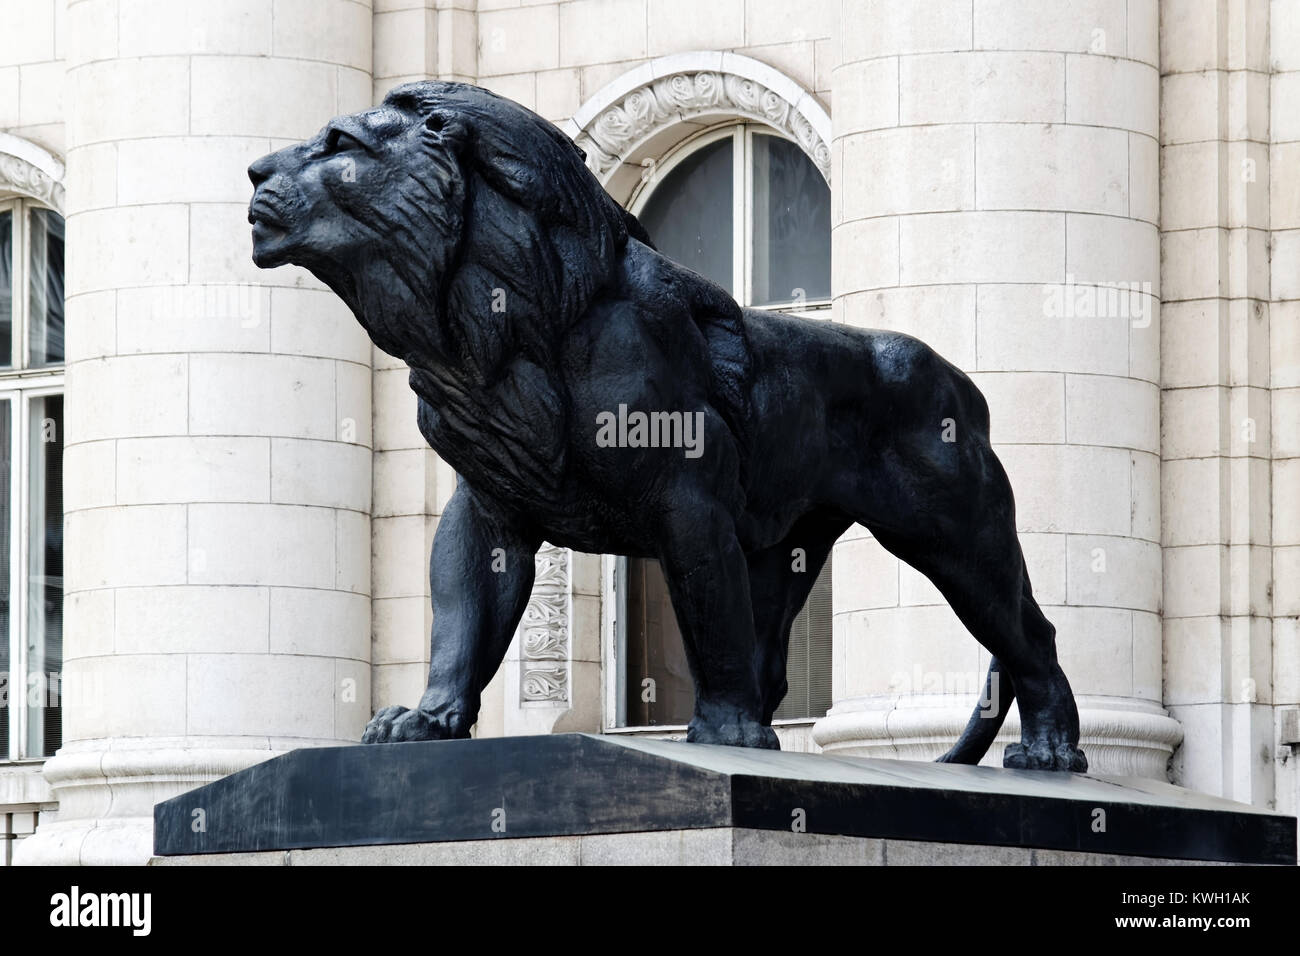 Sculpture of a lion with columns, arches of a building in classical style in background. Palace of Justice, Bulgaria, Sofia. Stock Photo